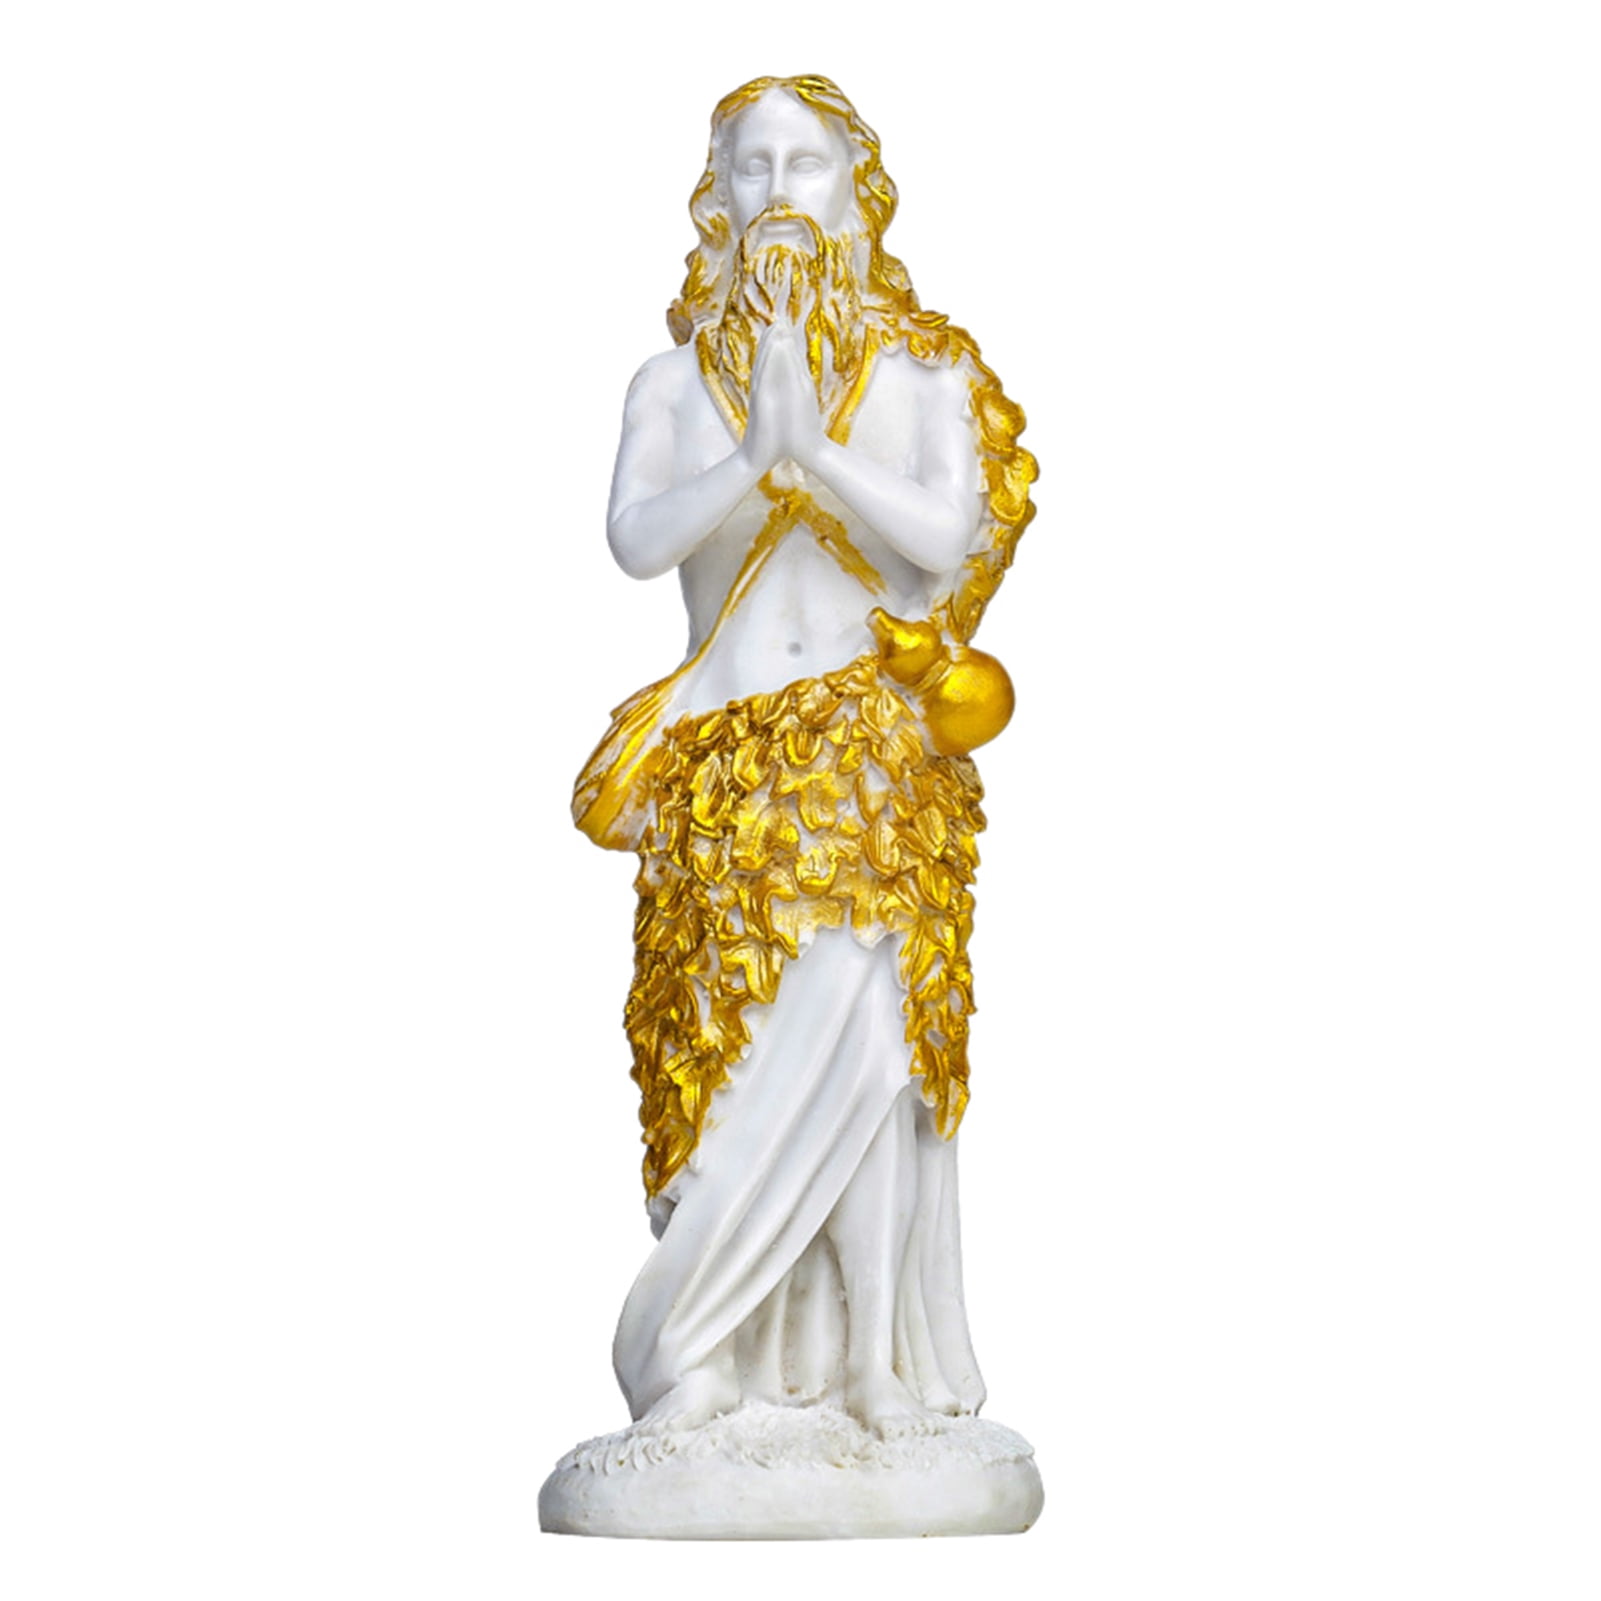 Famure Jesus Collectible Statue Son of God Sculpture Home Resin Figurine -  